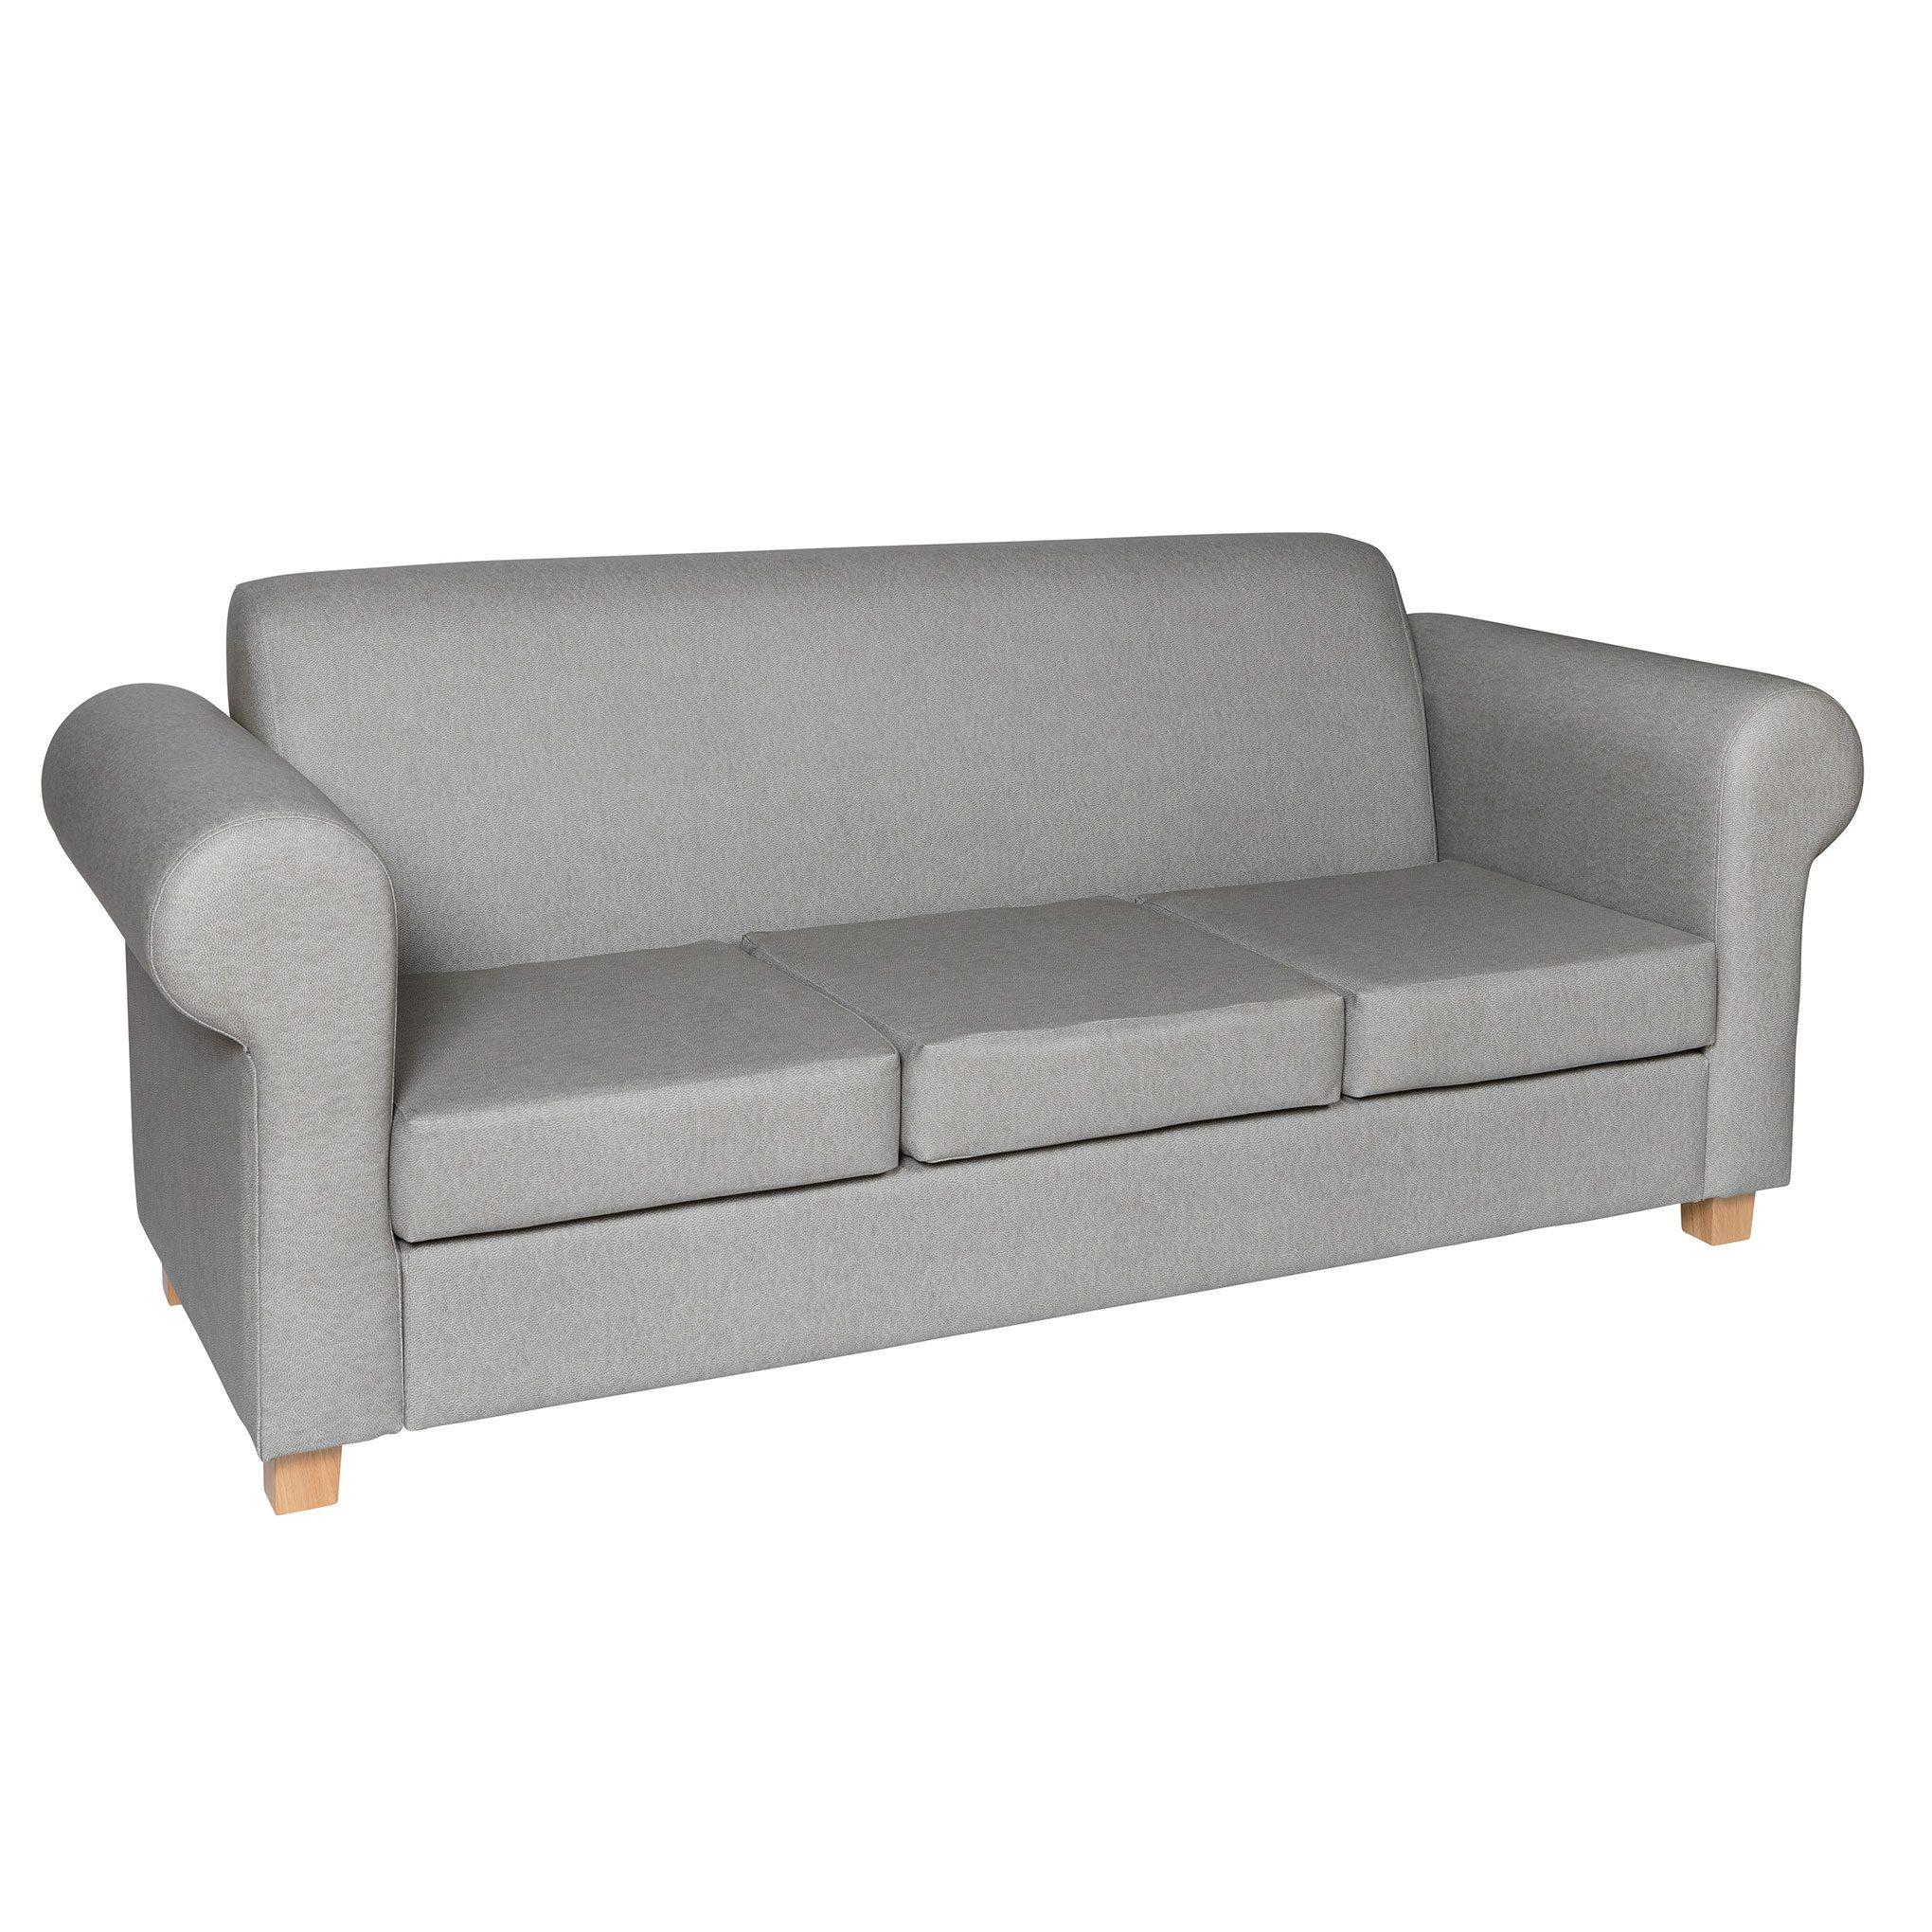 Arden 3 Seater with Roll Arm